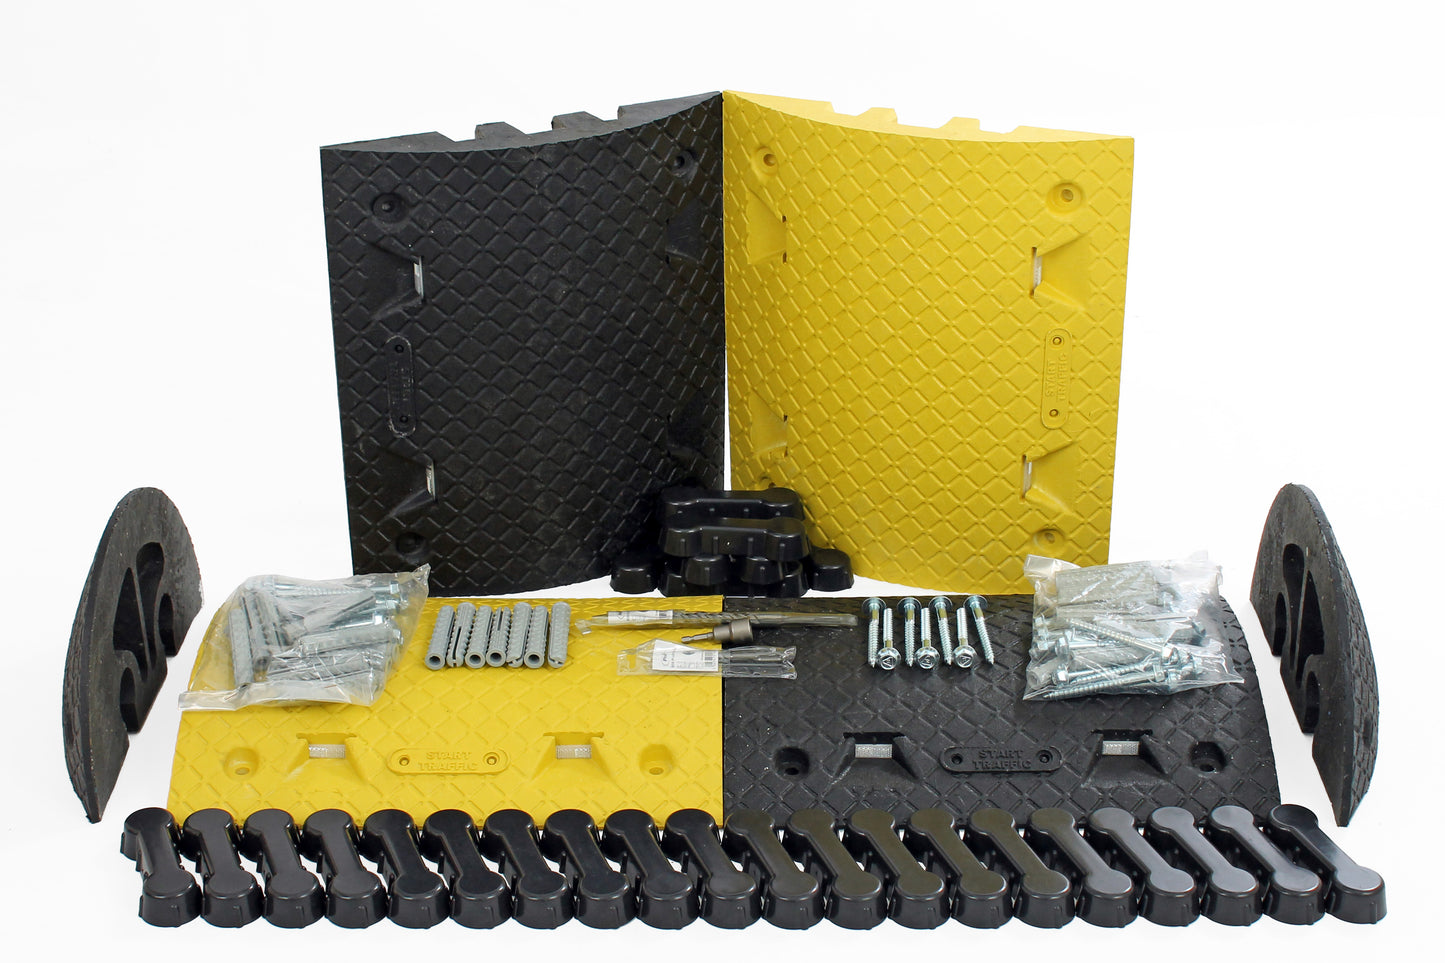 Premium Speed Bump Kit, 50mm - Complete Kit with Free Delivery